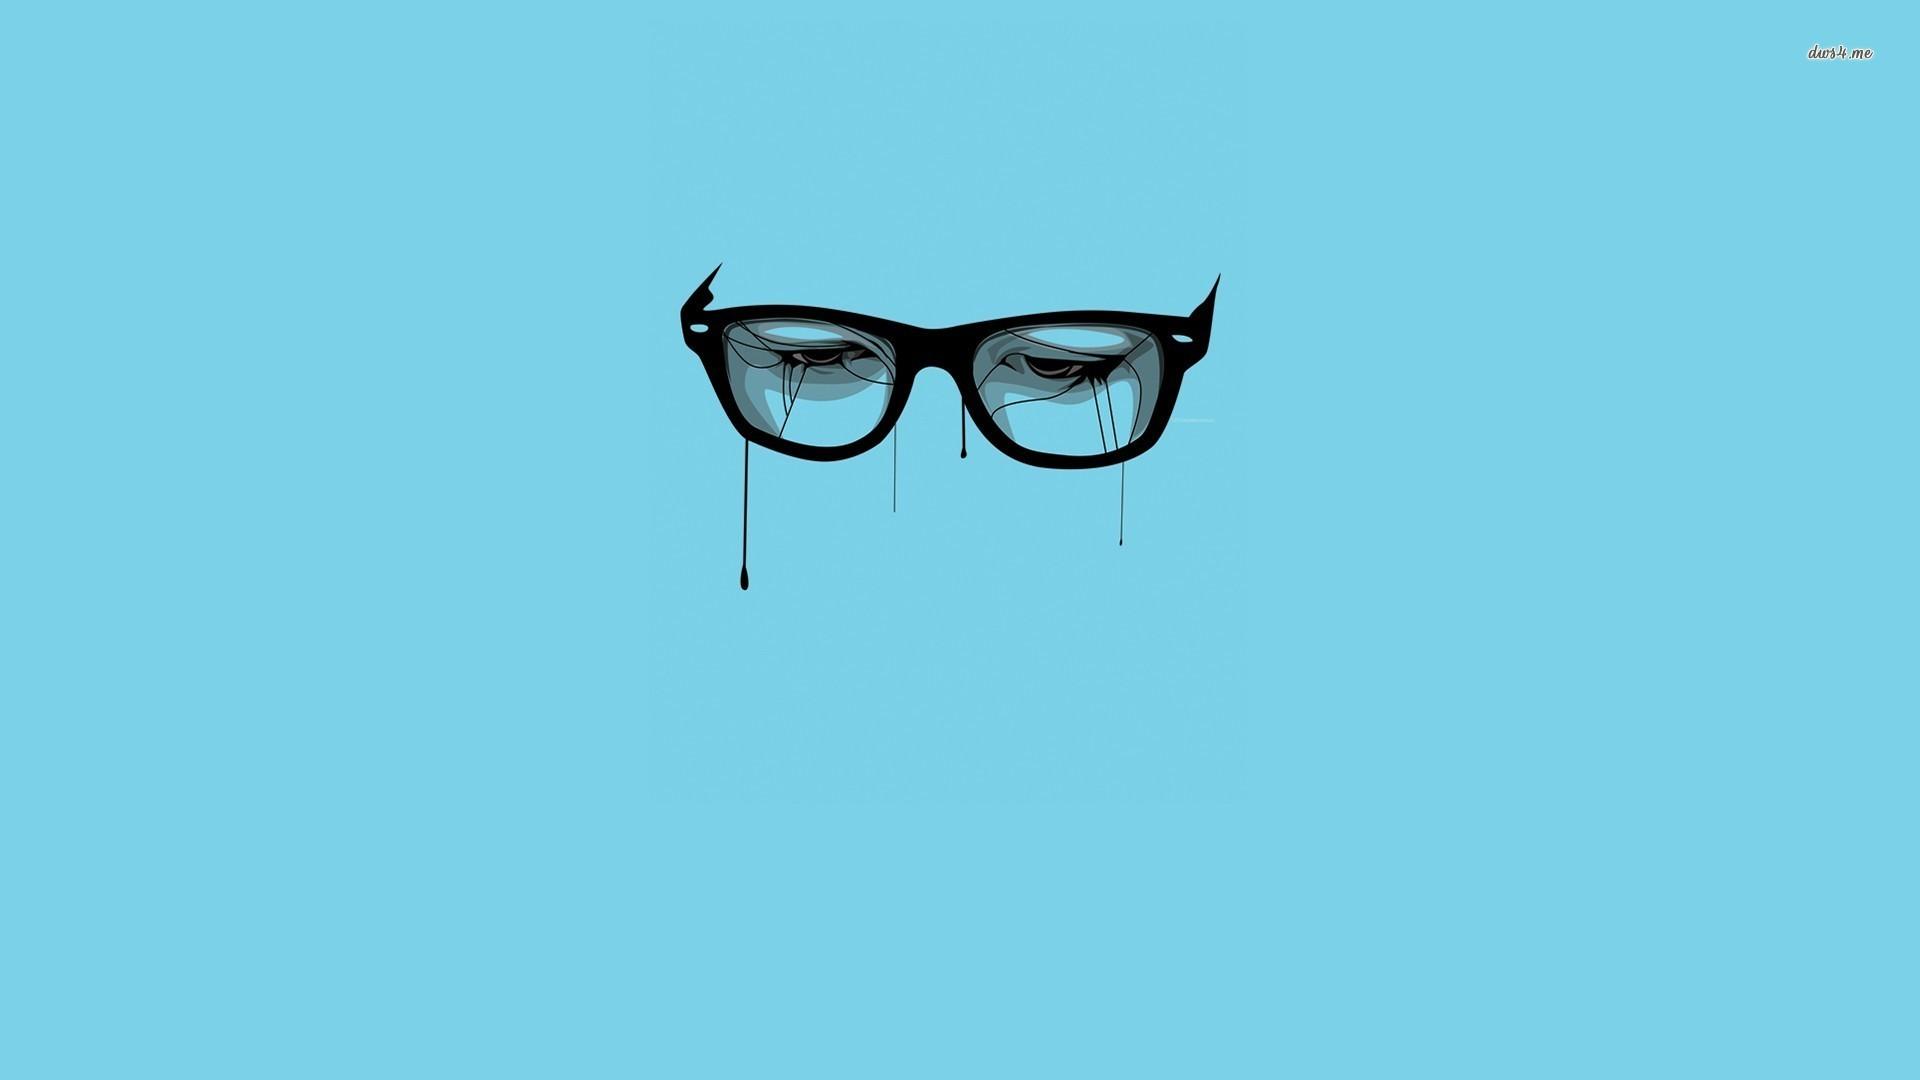 Crying eyes with black glasses wallpaper wallpaper